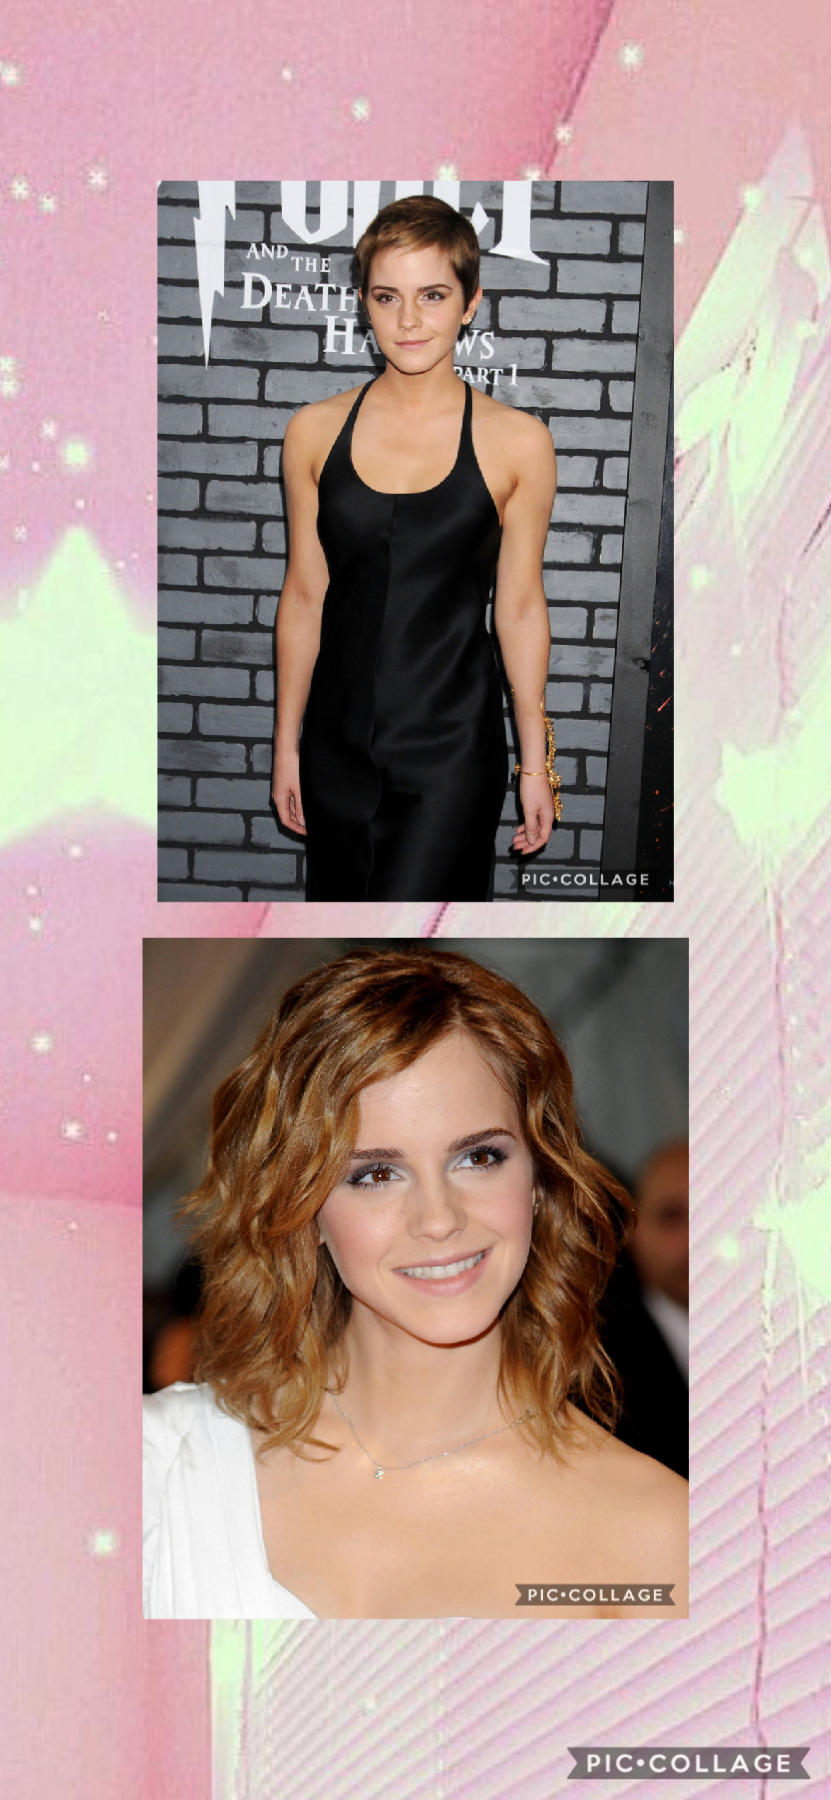 🌷Tap🌷
Emma Watson
Hot or not?
This is reposted because it’s not showing up for me, lmk if it’s already up.